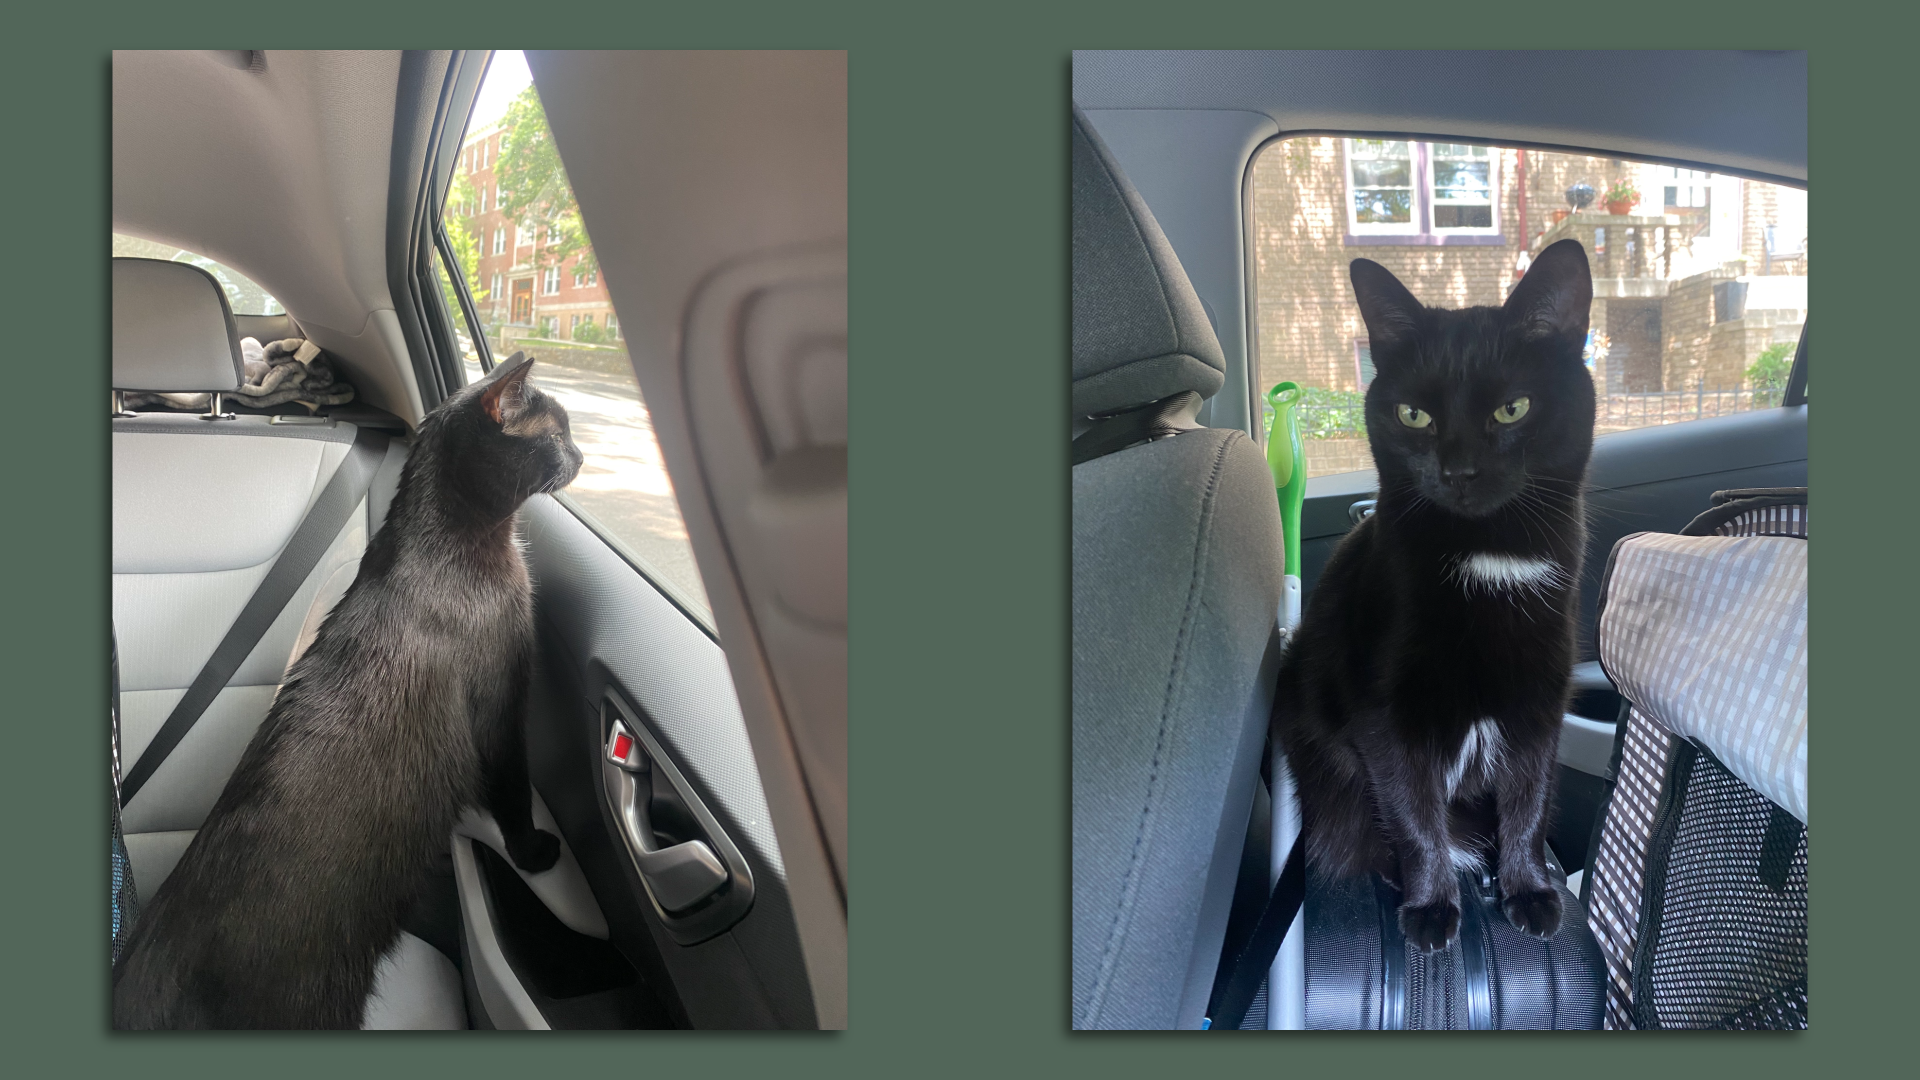 Lola the cat displeased with her current situation in the car. 